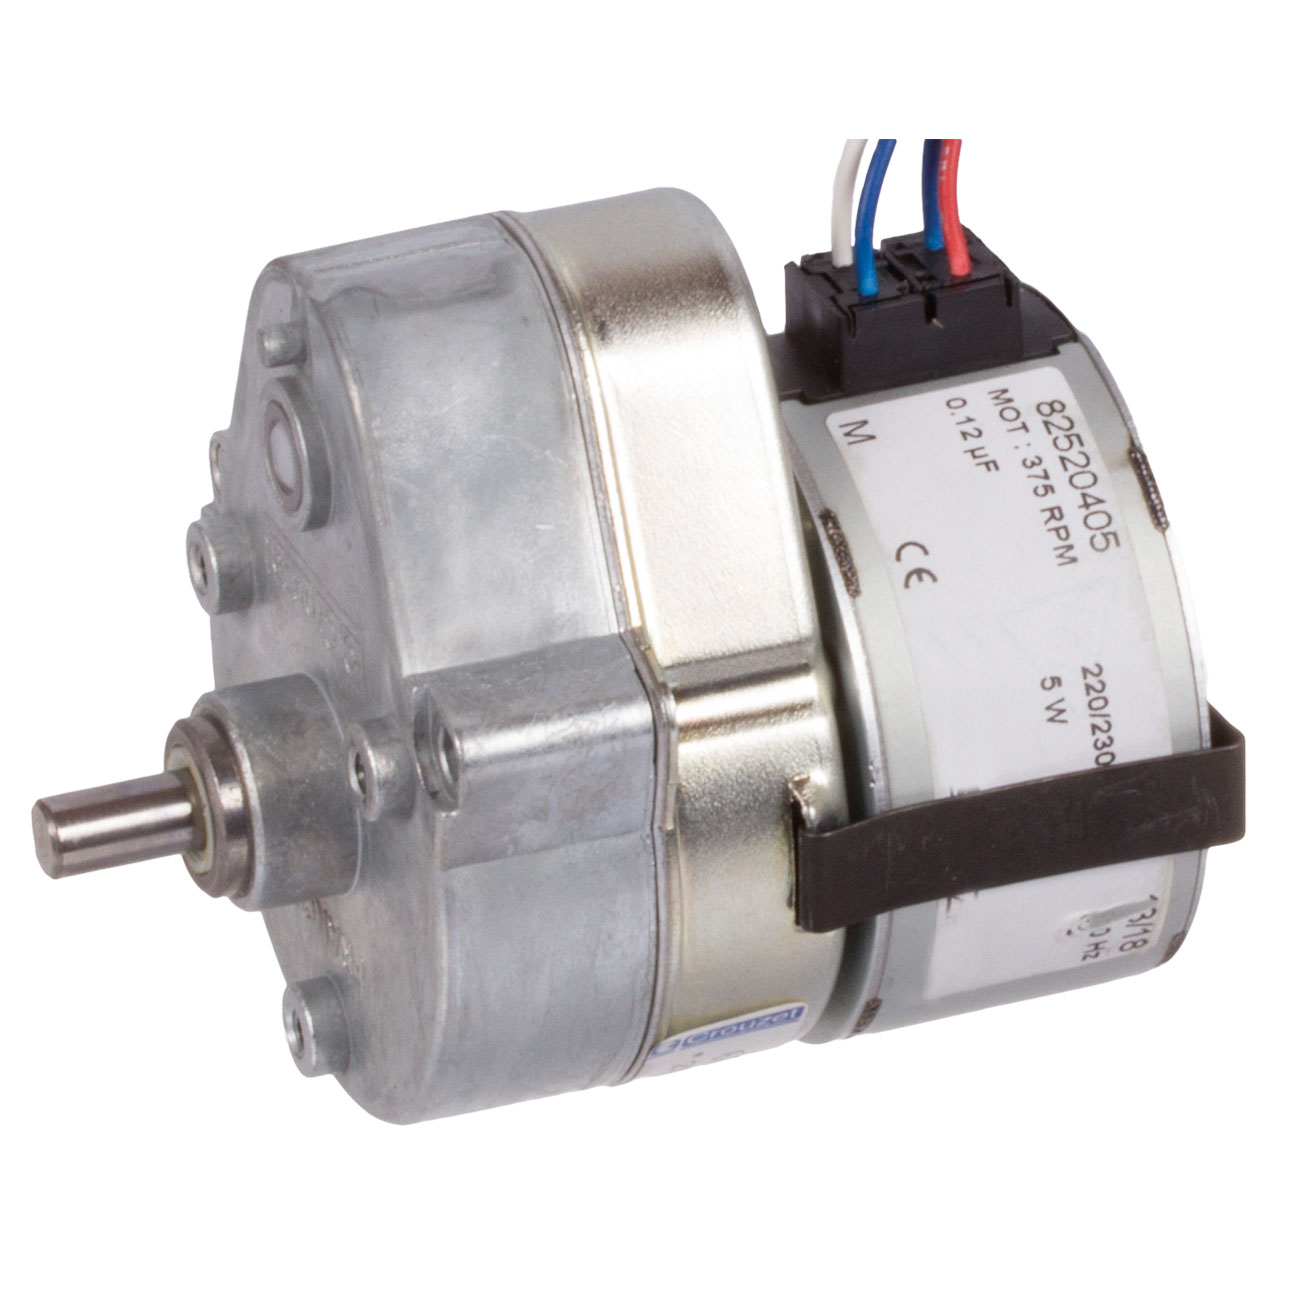 Small geared motor CRO 230V 50Hz with capacitor version B output